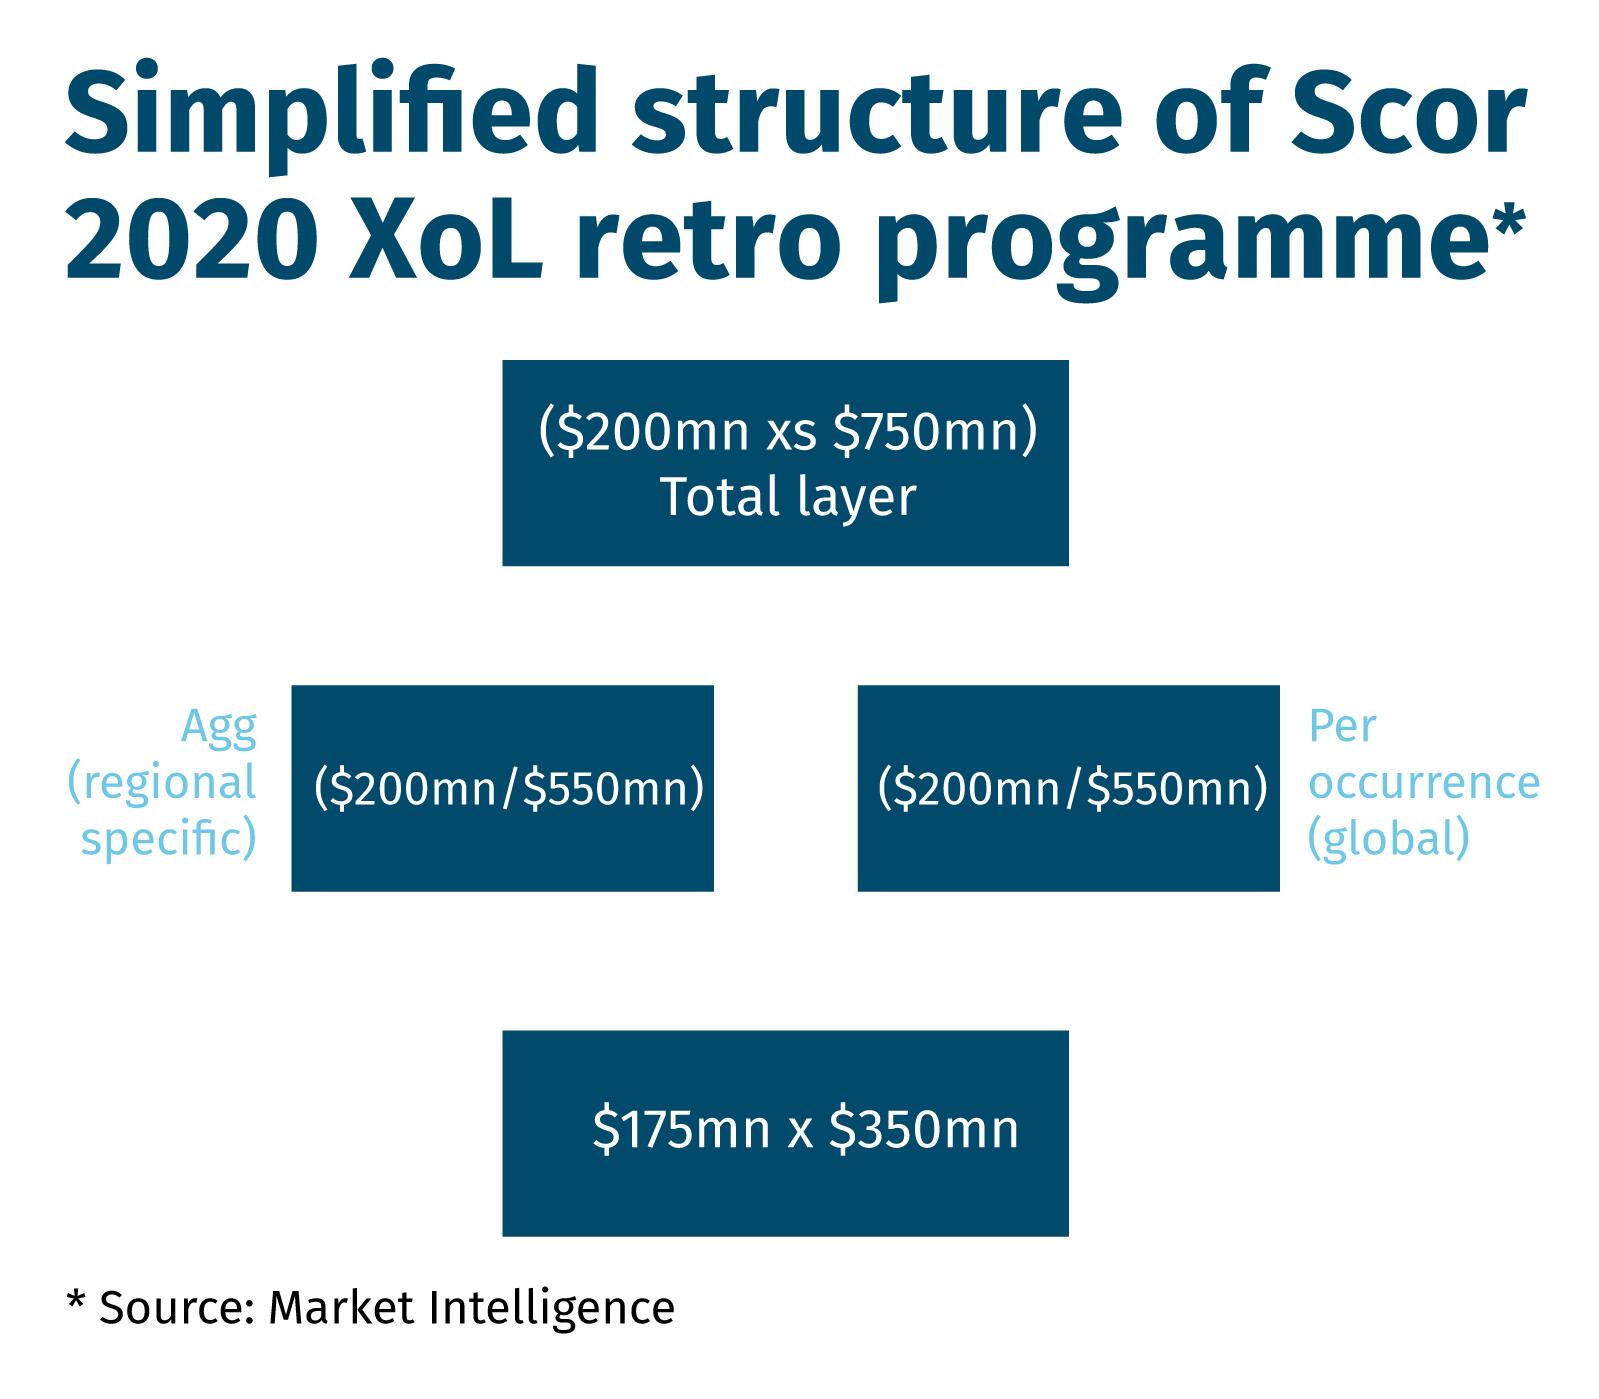 Simplified structure of Scor 2020 XoL retro programme